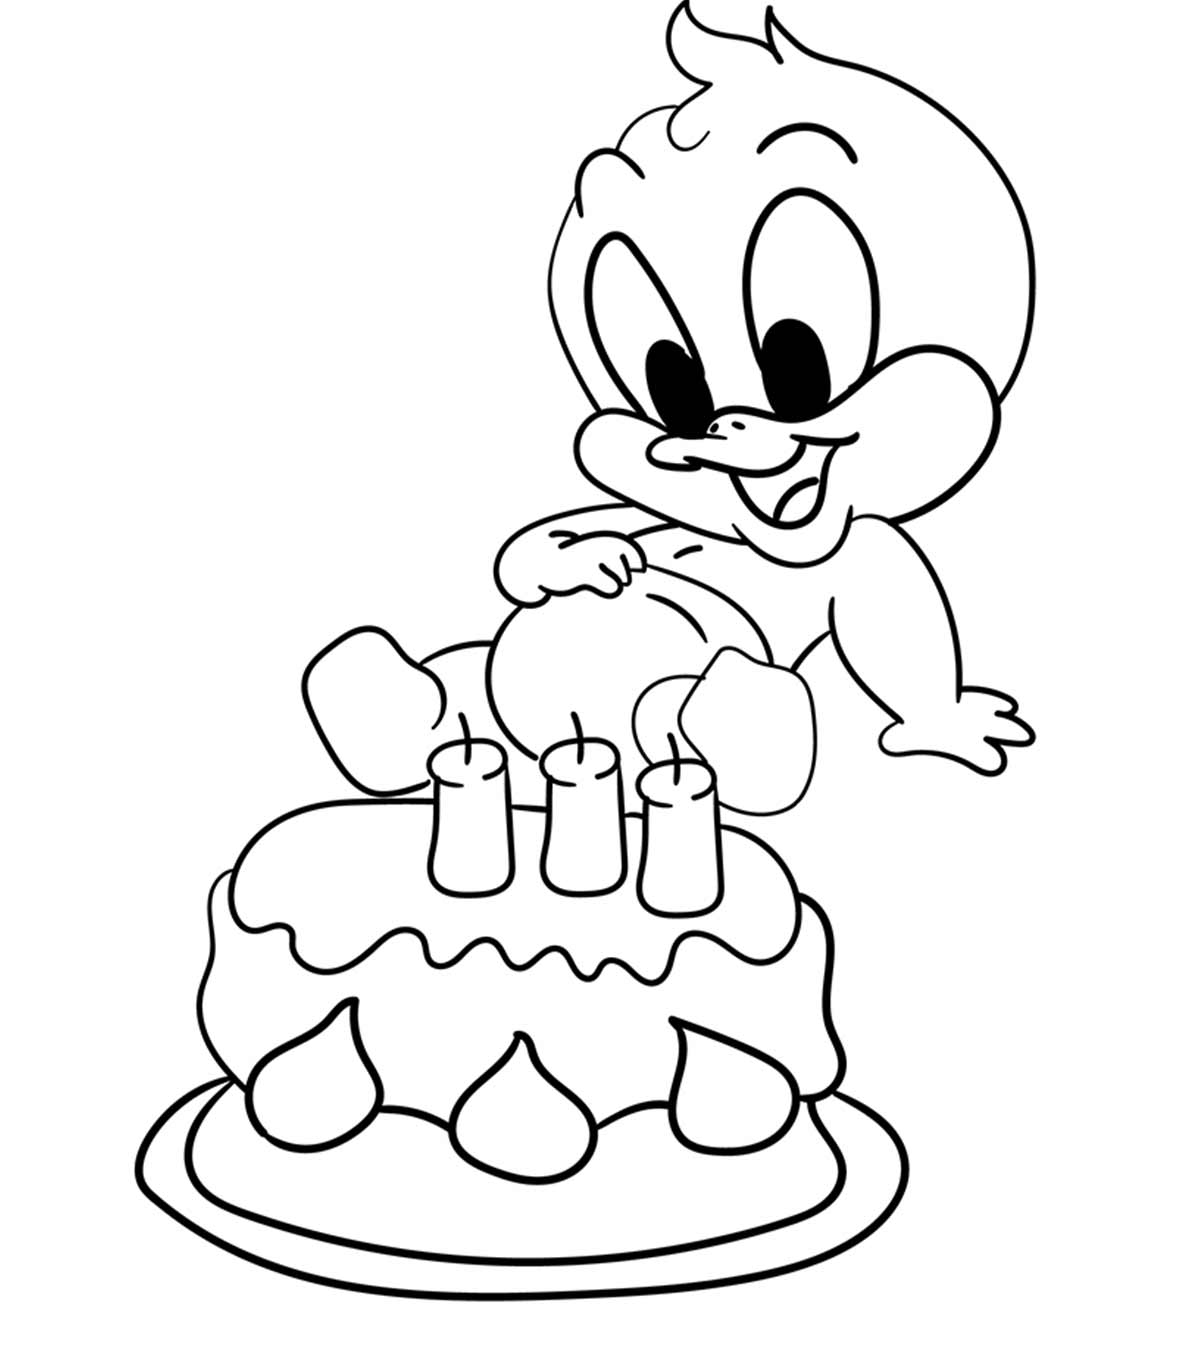 Top 10 Daffy Duck Coloring Pages For Kids_image